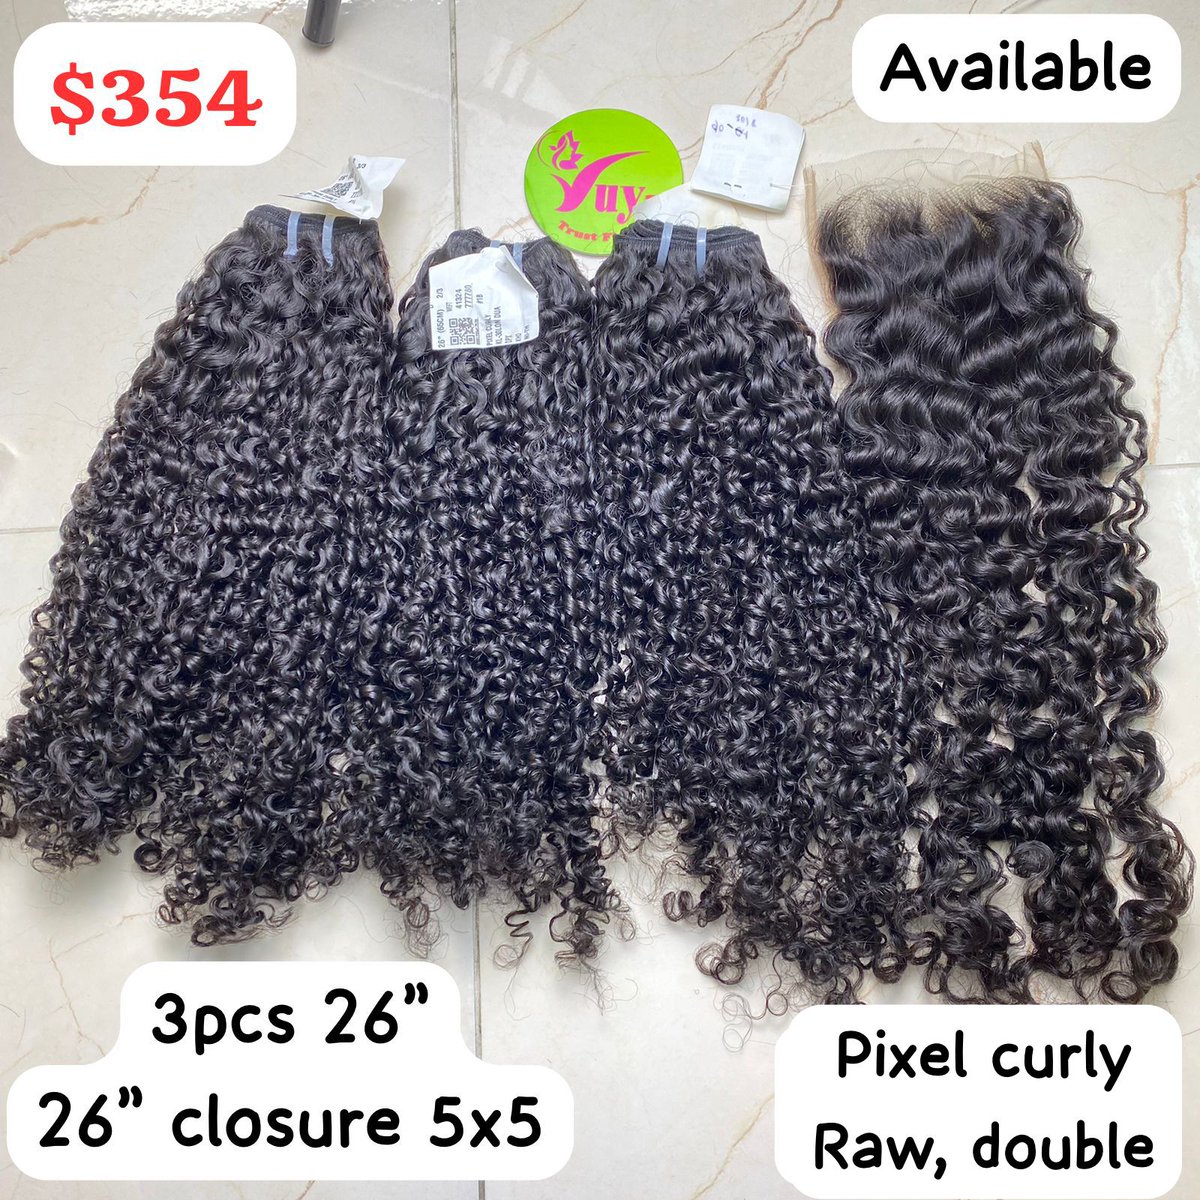 Set Pixel Curly With Raw Hair From VUY VietNam 😍Contact with me on whatsapp +84396092128 #wholesale hair #wholesalehairvendors #wholesalehairsupplier #vuyvietnam #wholesalehairextension #hairsupplier #hairsupplierinvietnam #rawhair #rawhairvendor #hairfactory